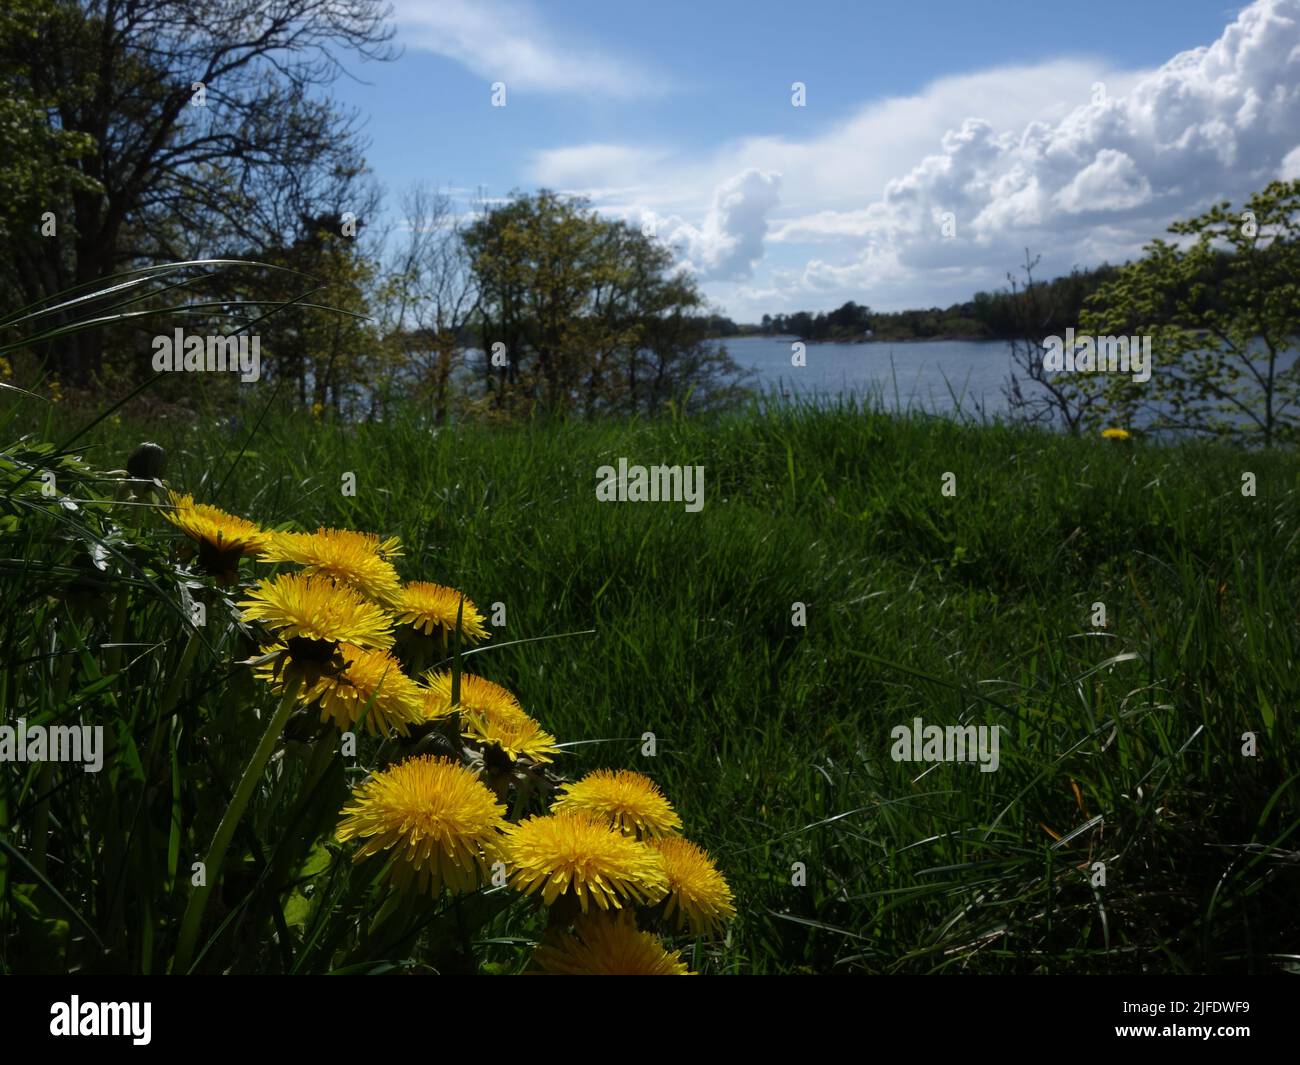 A bouquet of dandelions extending, with its long stems, up towards the sun, in that grassy hillside. Stock Photo